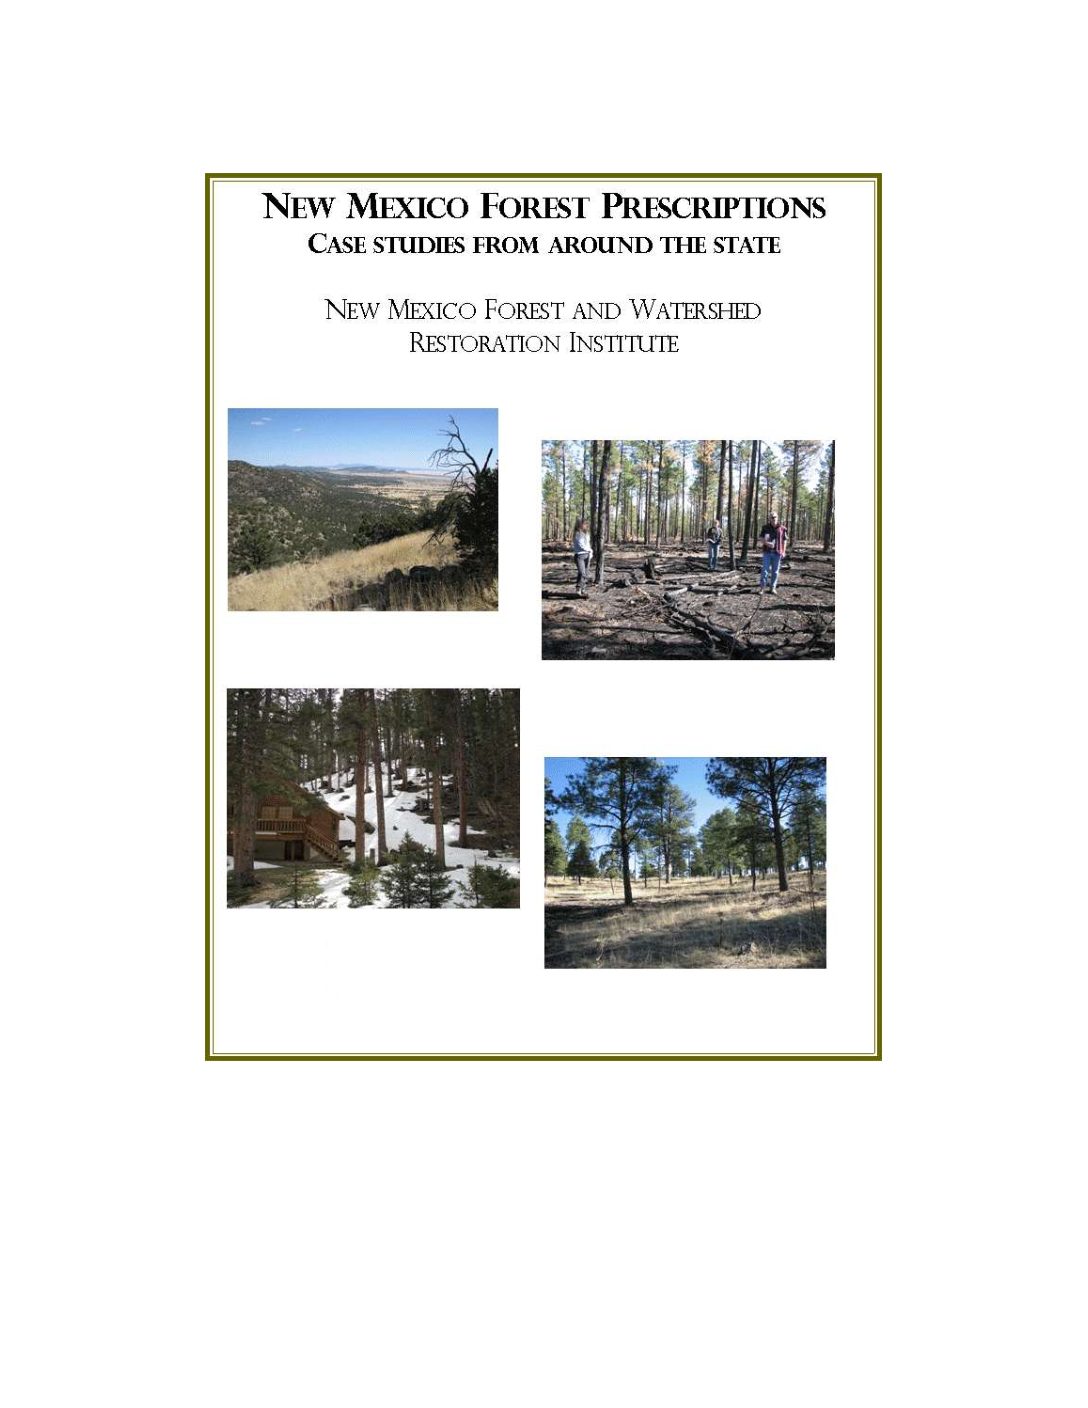 NM Forest Prescriptions: Case studies from around the state